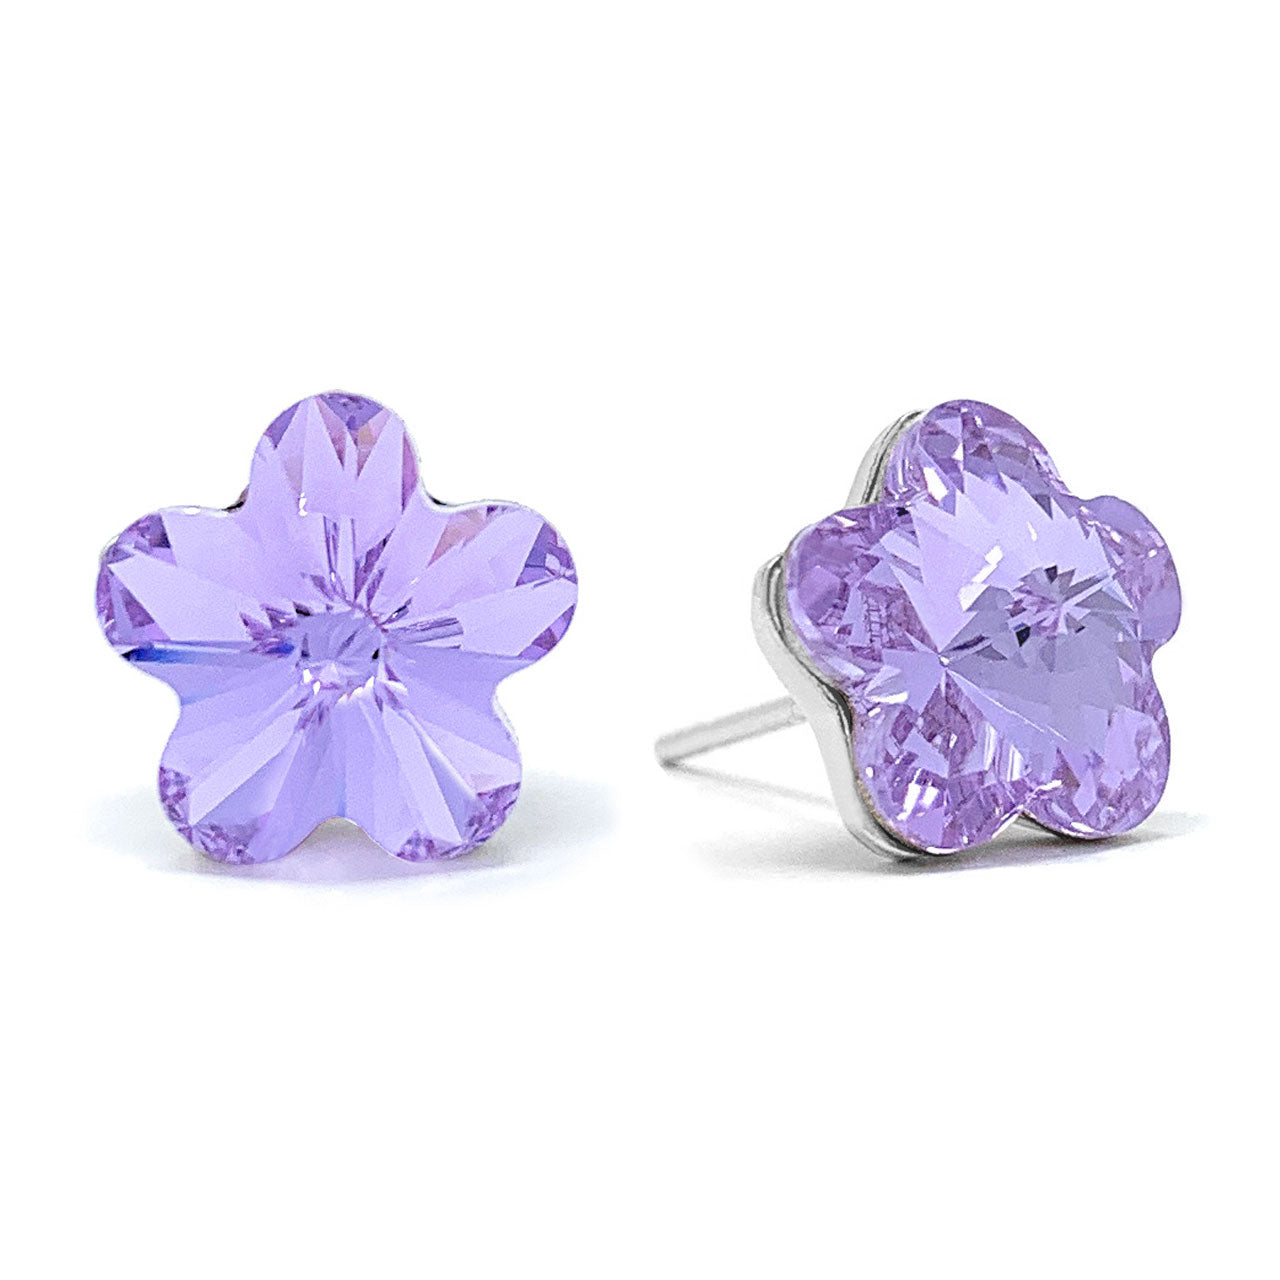 Anna Stud Earrings with Purple Violet Flower Crystals from Swarovski Silver Toned Rhodium Plated - Ed Heart